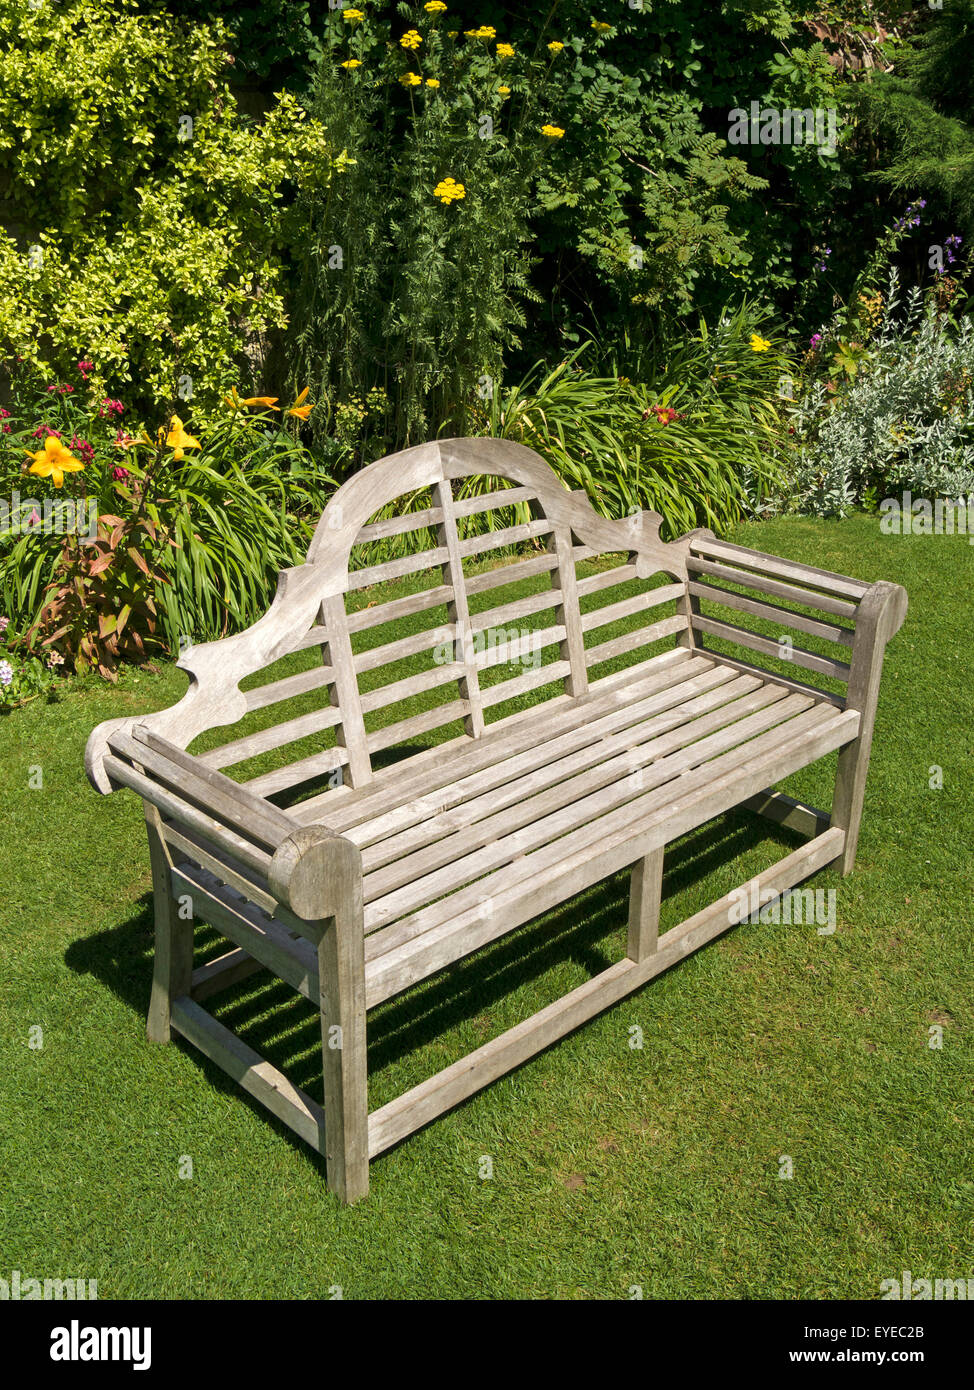 Ornate wooden garden bench seat on green lawn, Barnsdale 